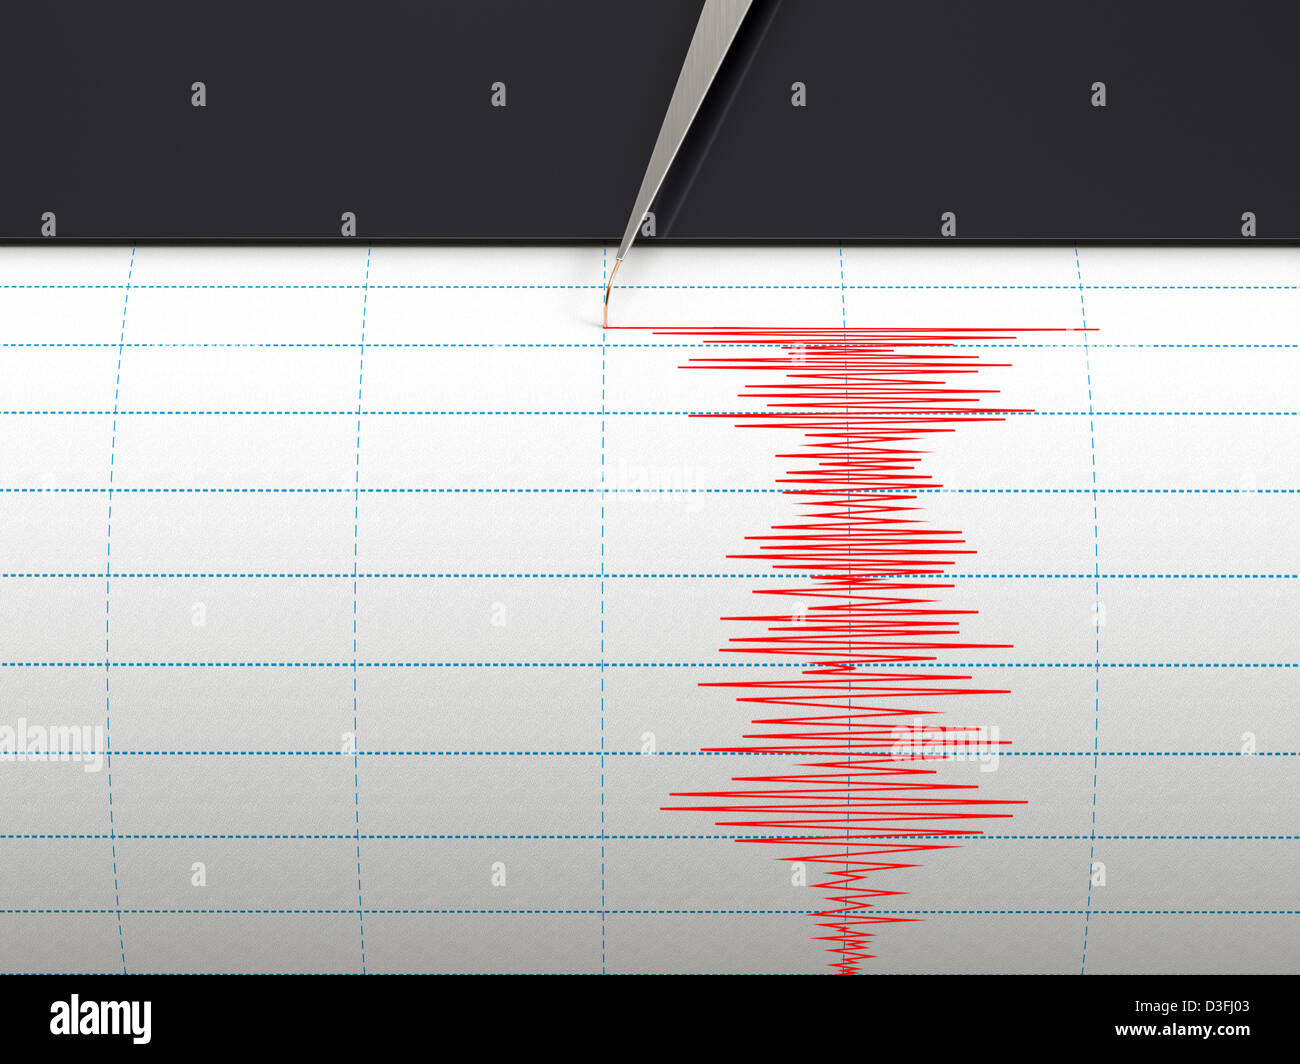 Seismograph instrument recording ground motion during earthquake Stock Photo